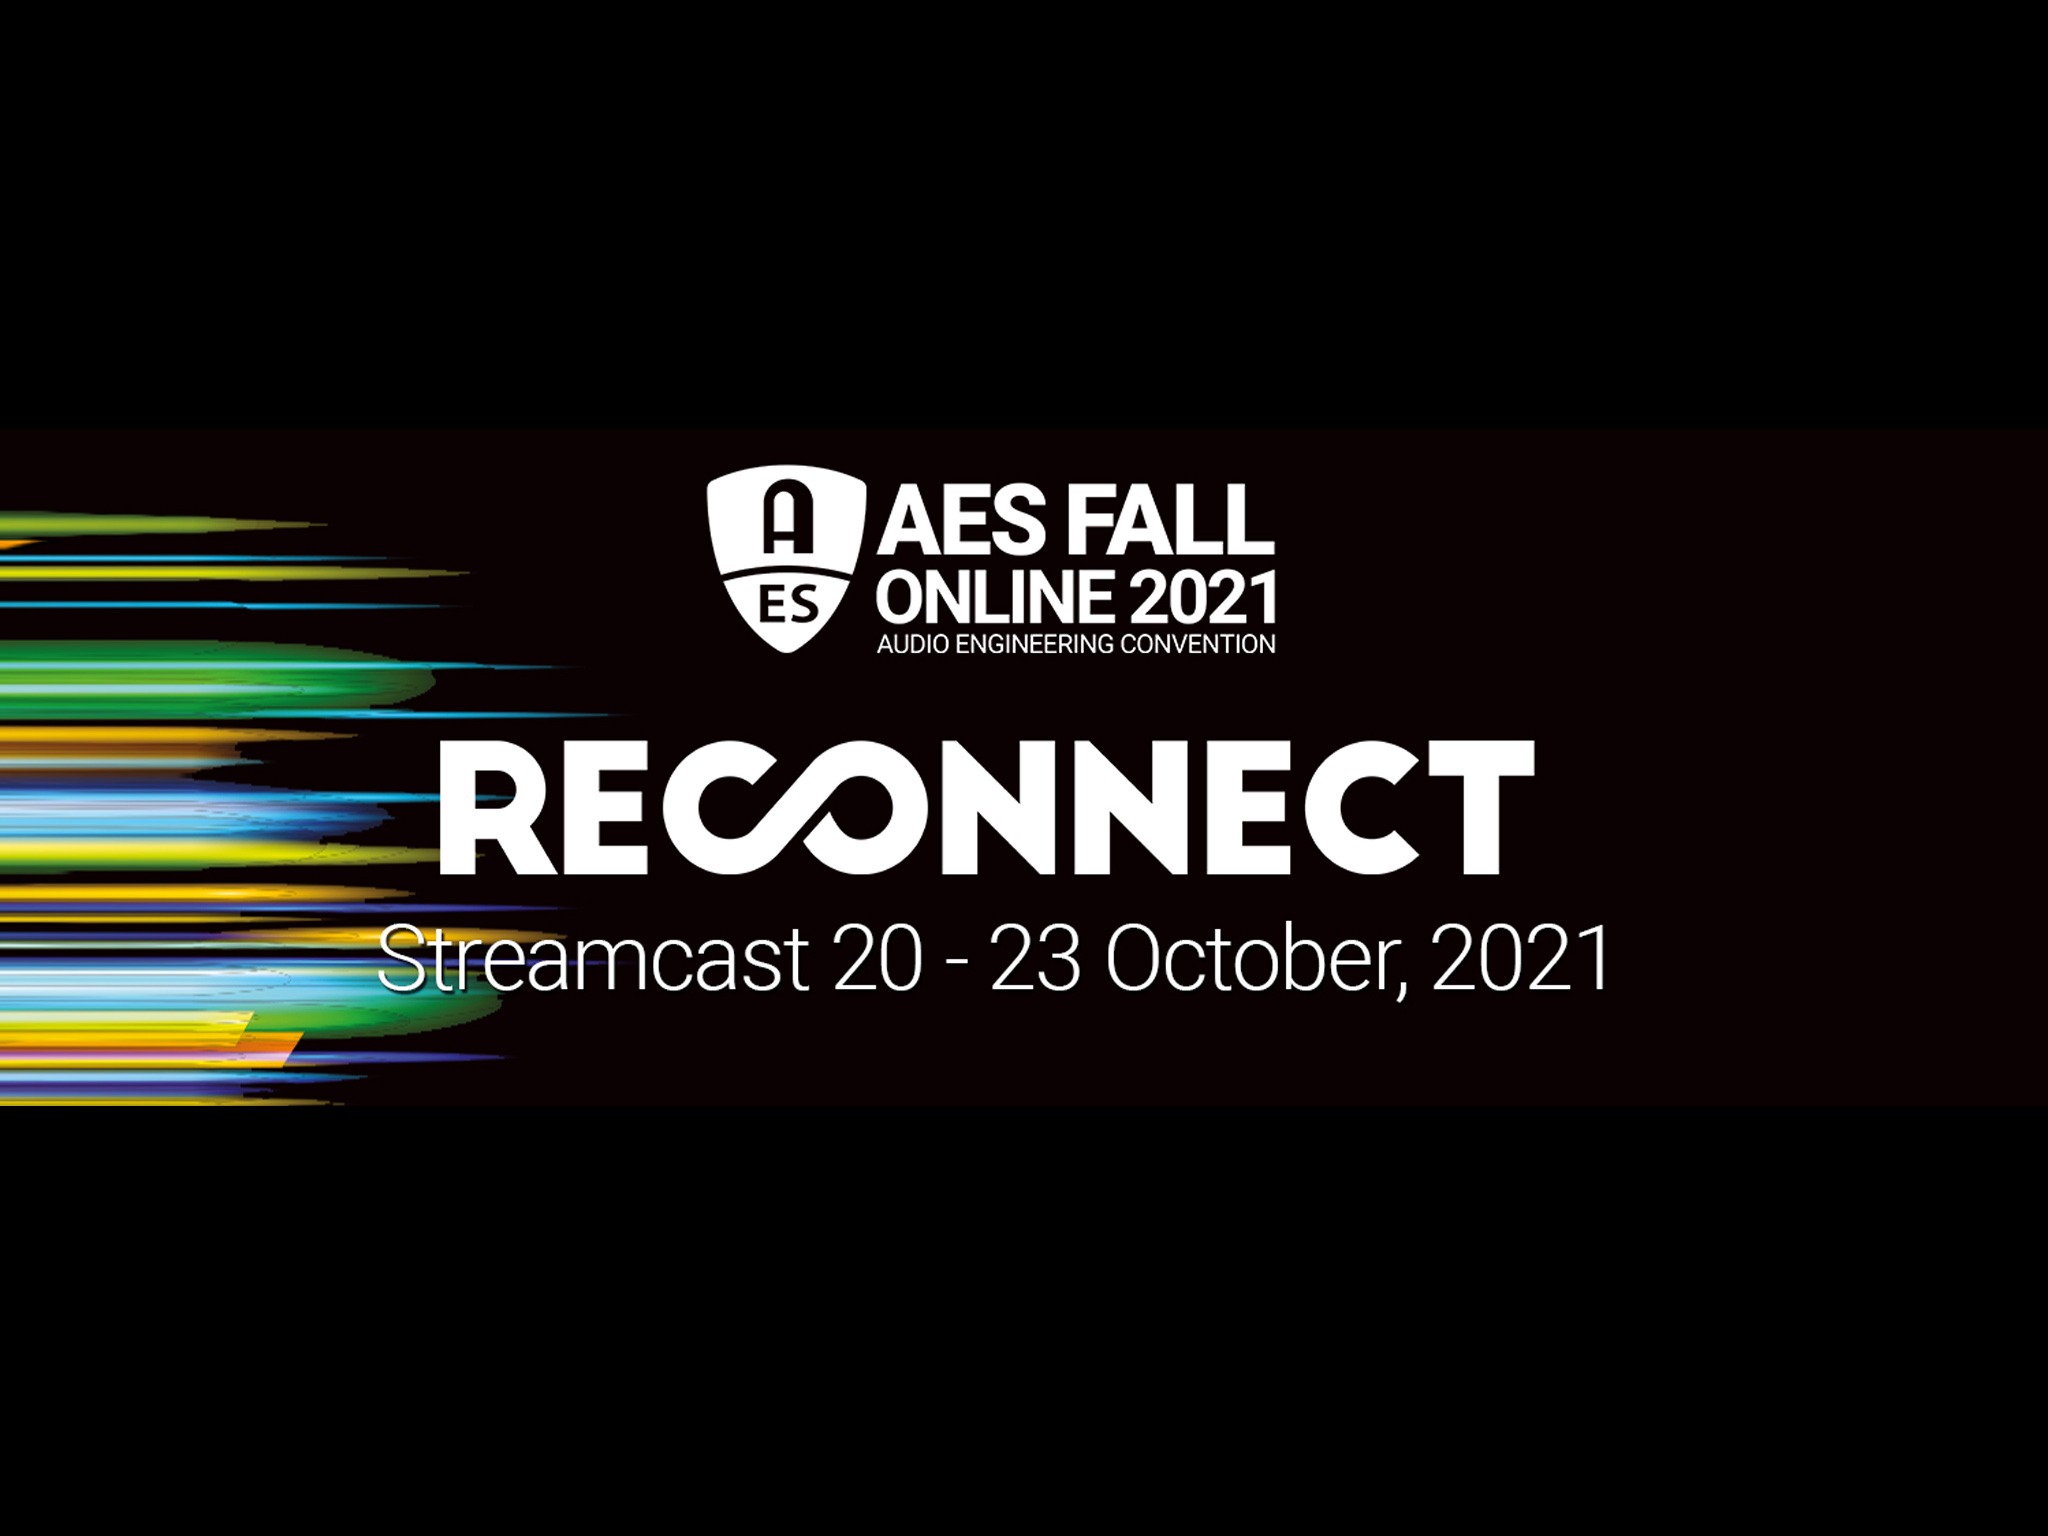 AES Fall Online 2021